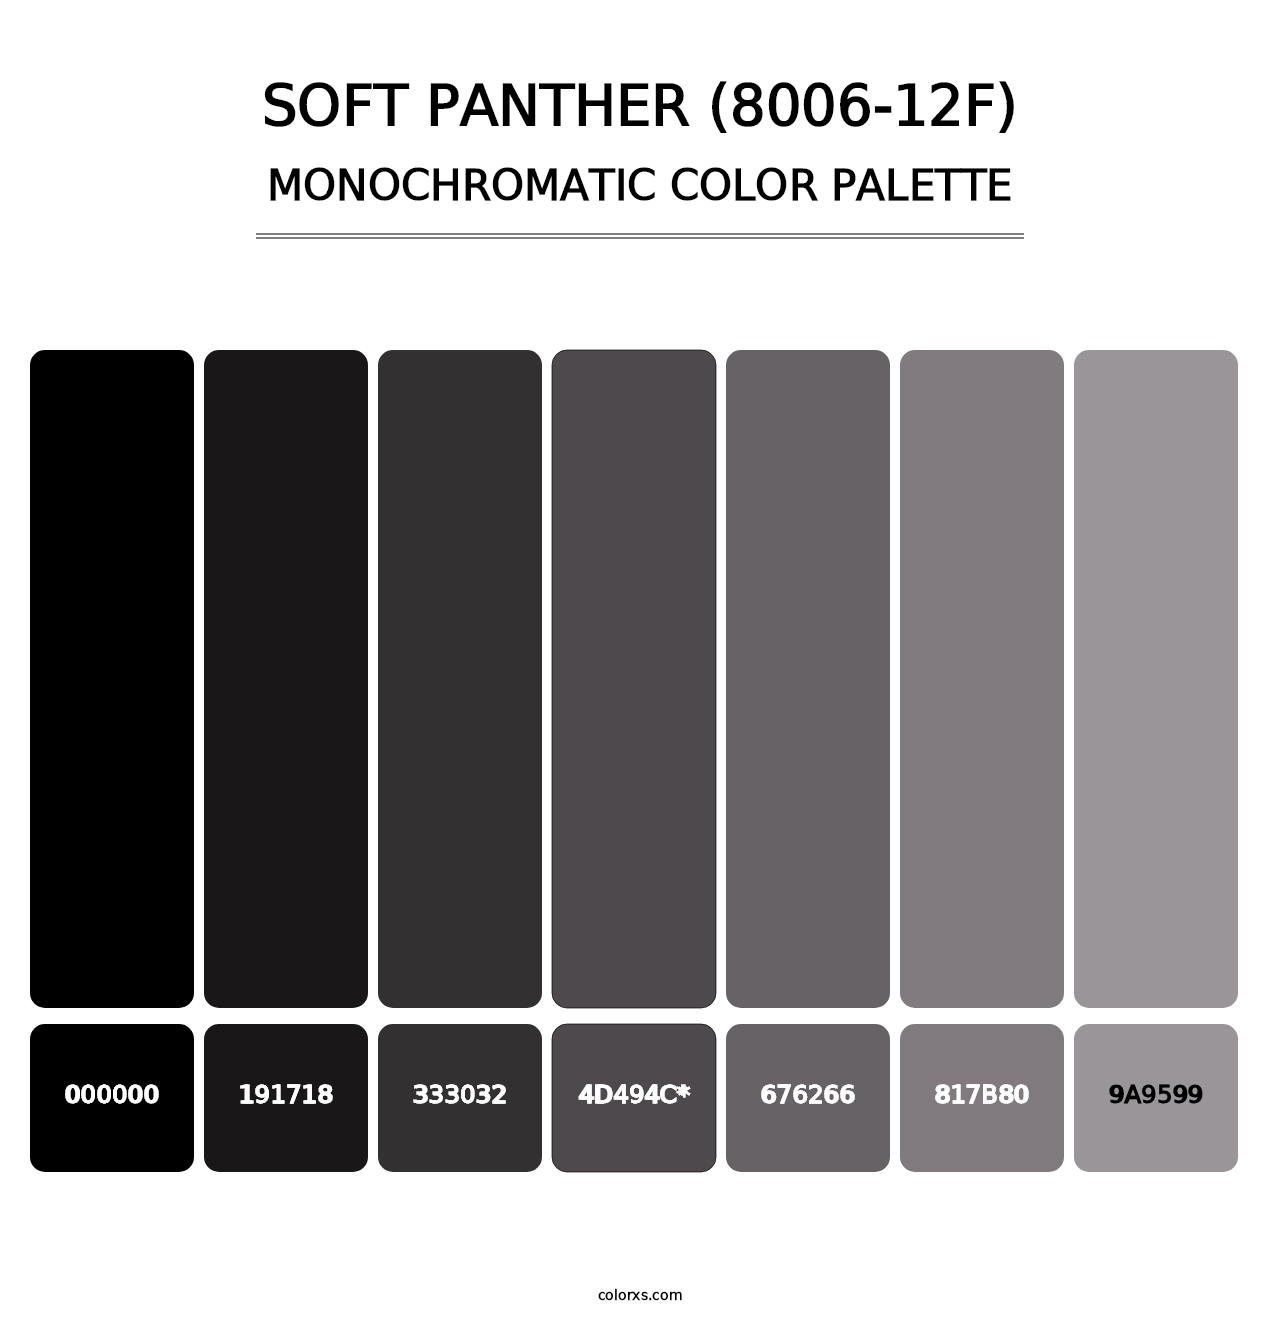 Soft Panther (8006-12F) - Monochromatic Color Palette